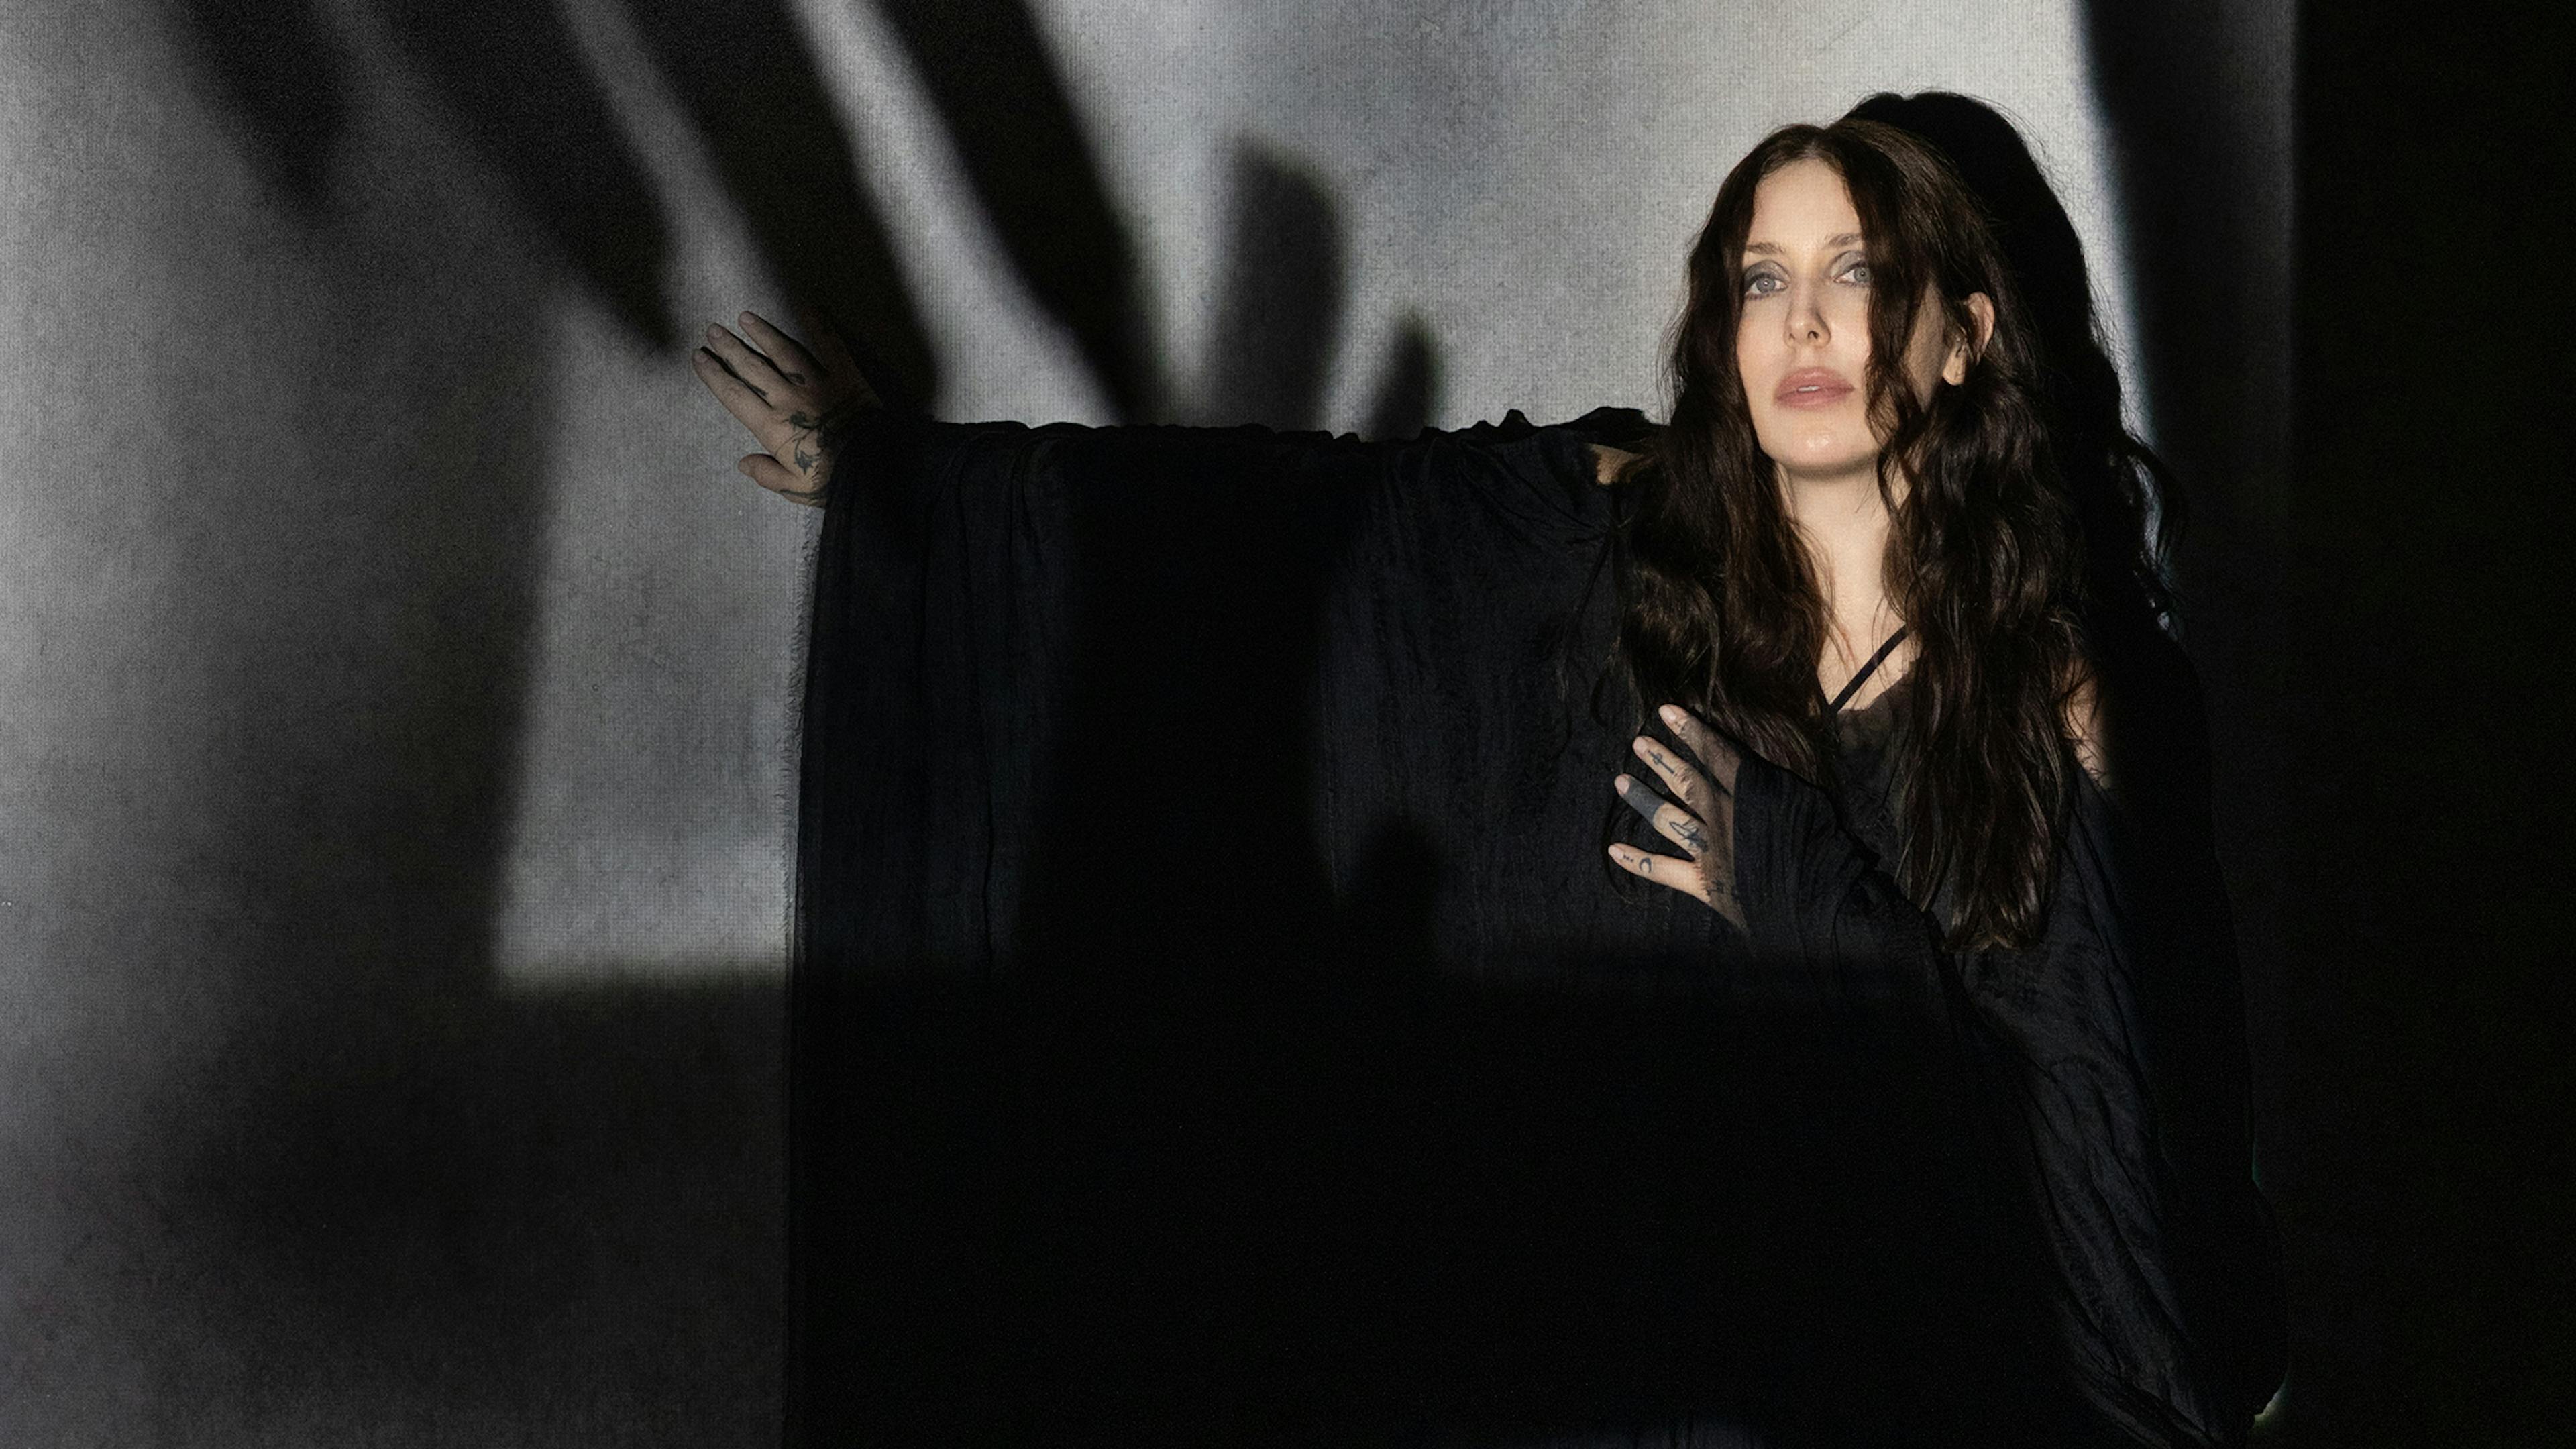 Chelsea Wolfe announces EP, releases new remix by ﻿††† (Crosses)